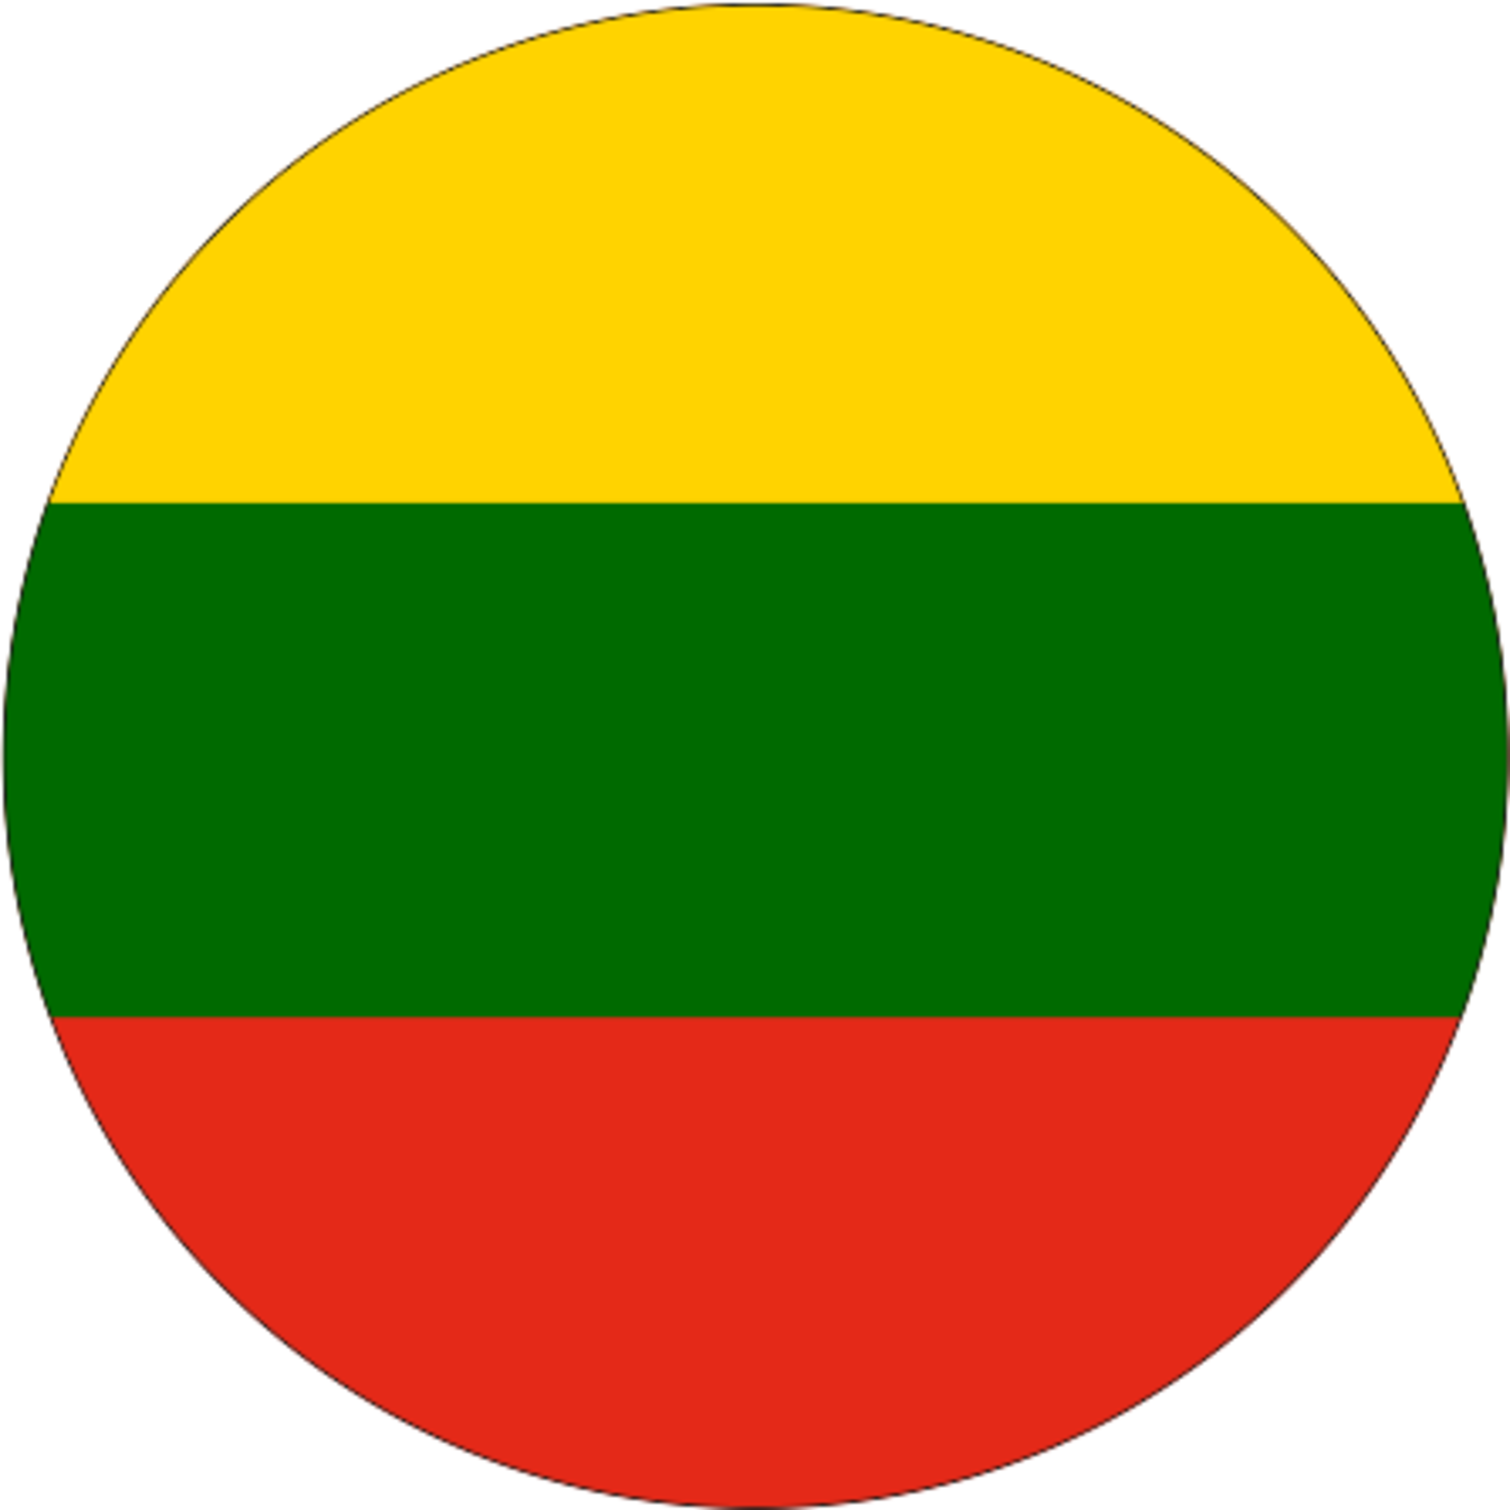 Flag of Lithuania in a circle